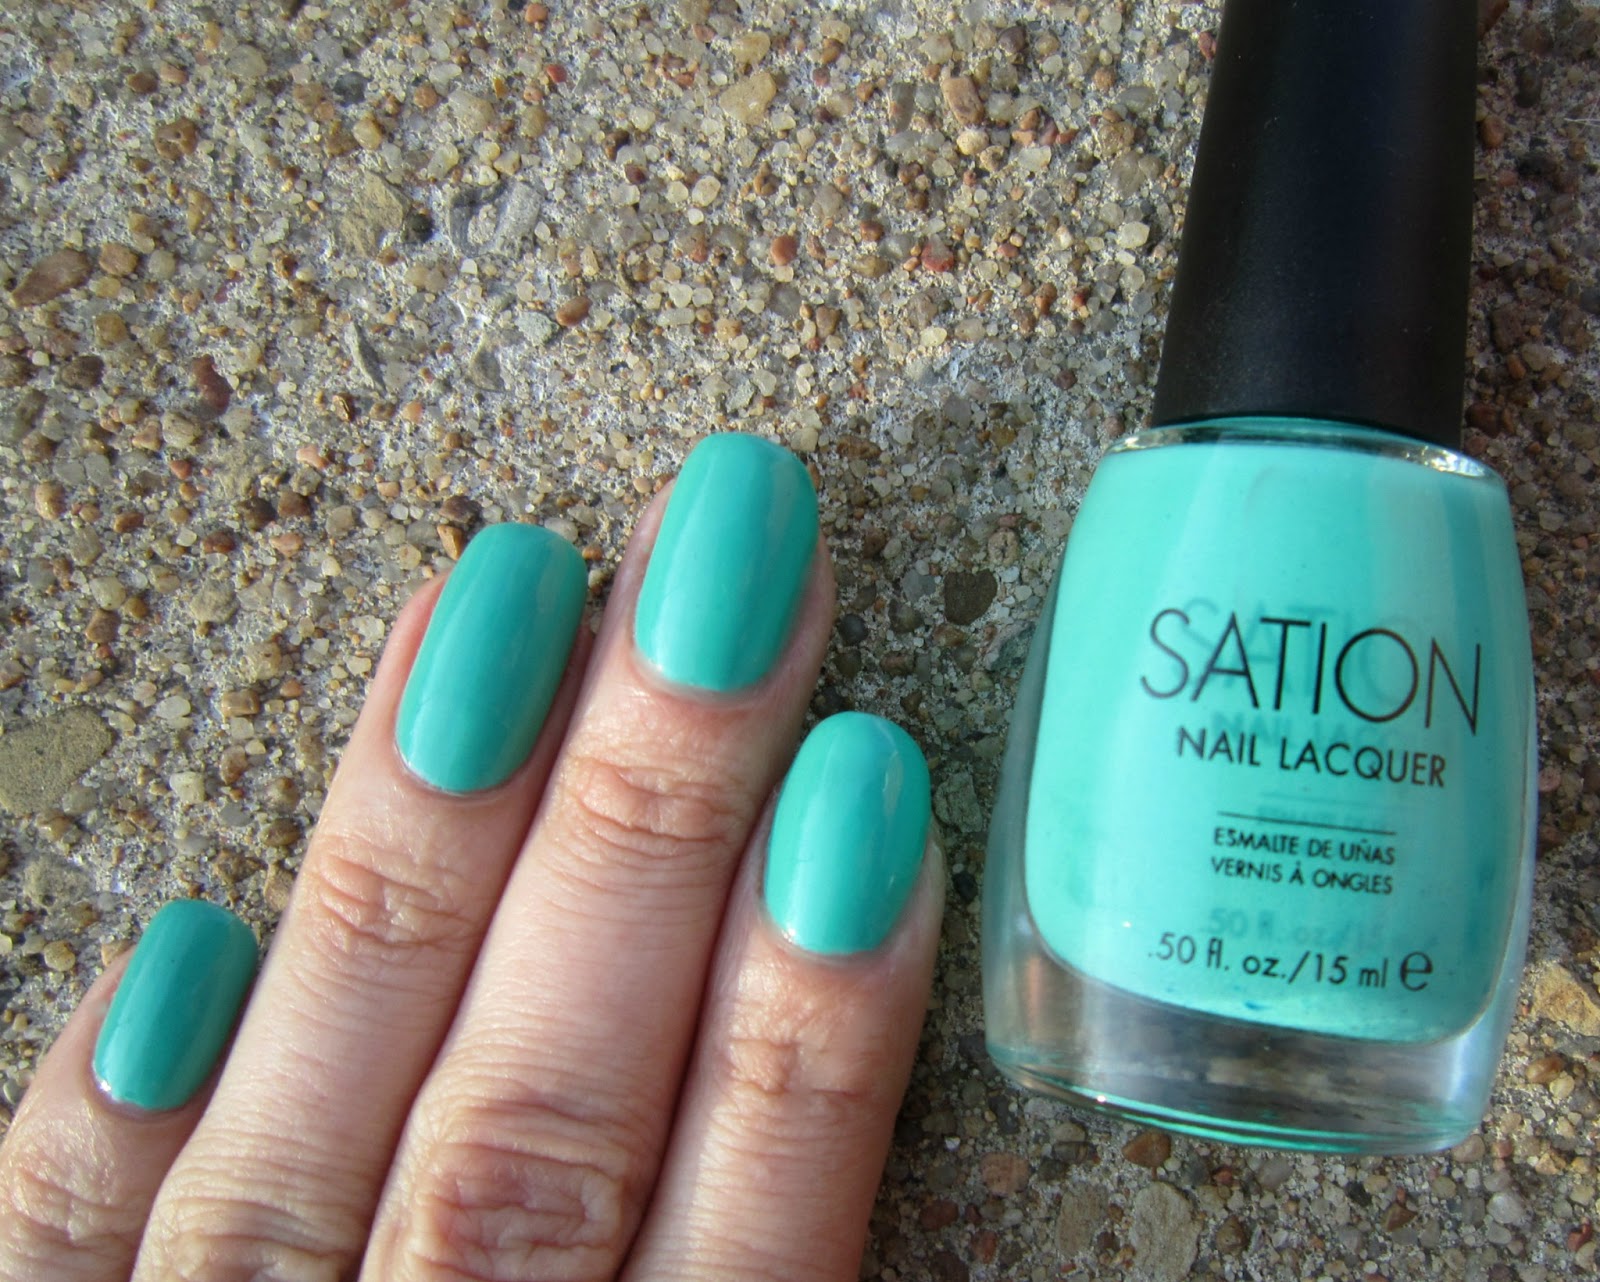 2. Sation Nail Polish in "Color Me Vibrant" - wide 7